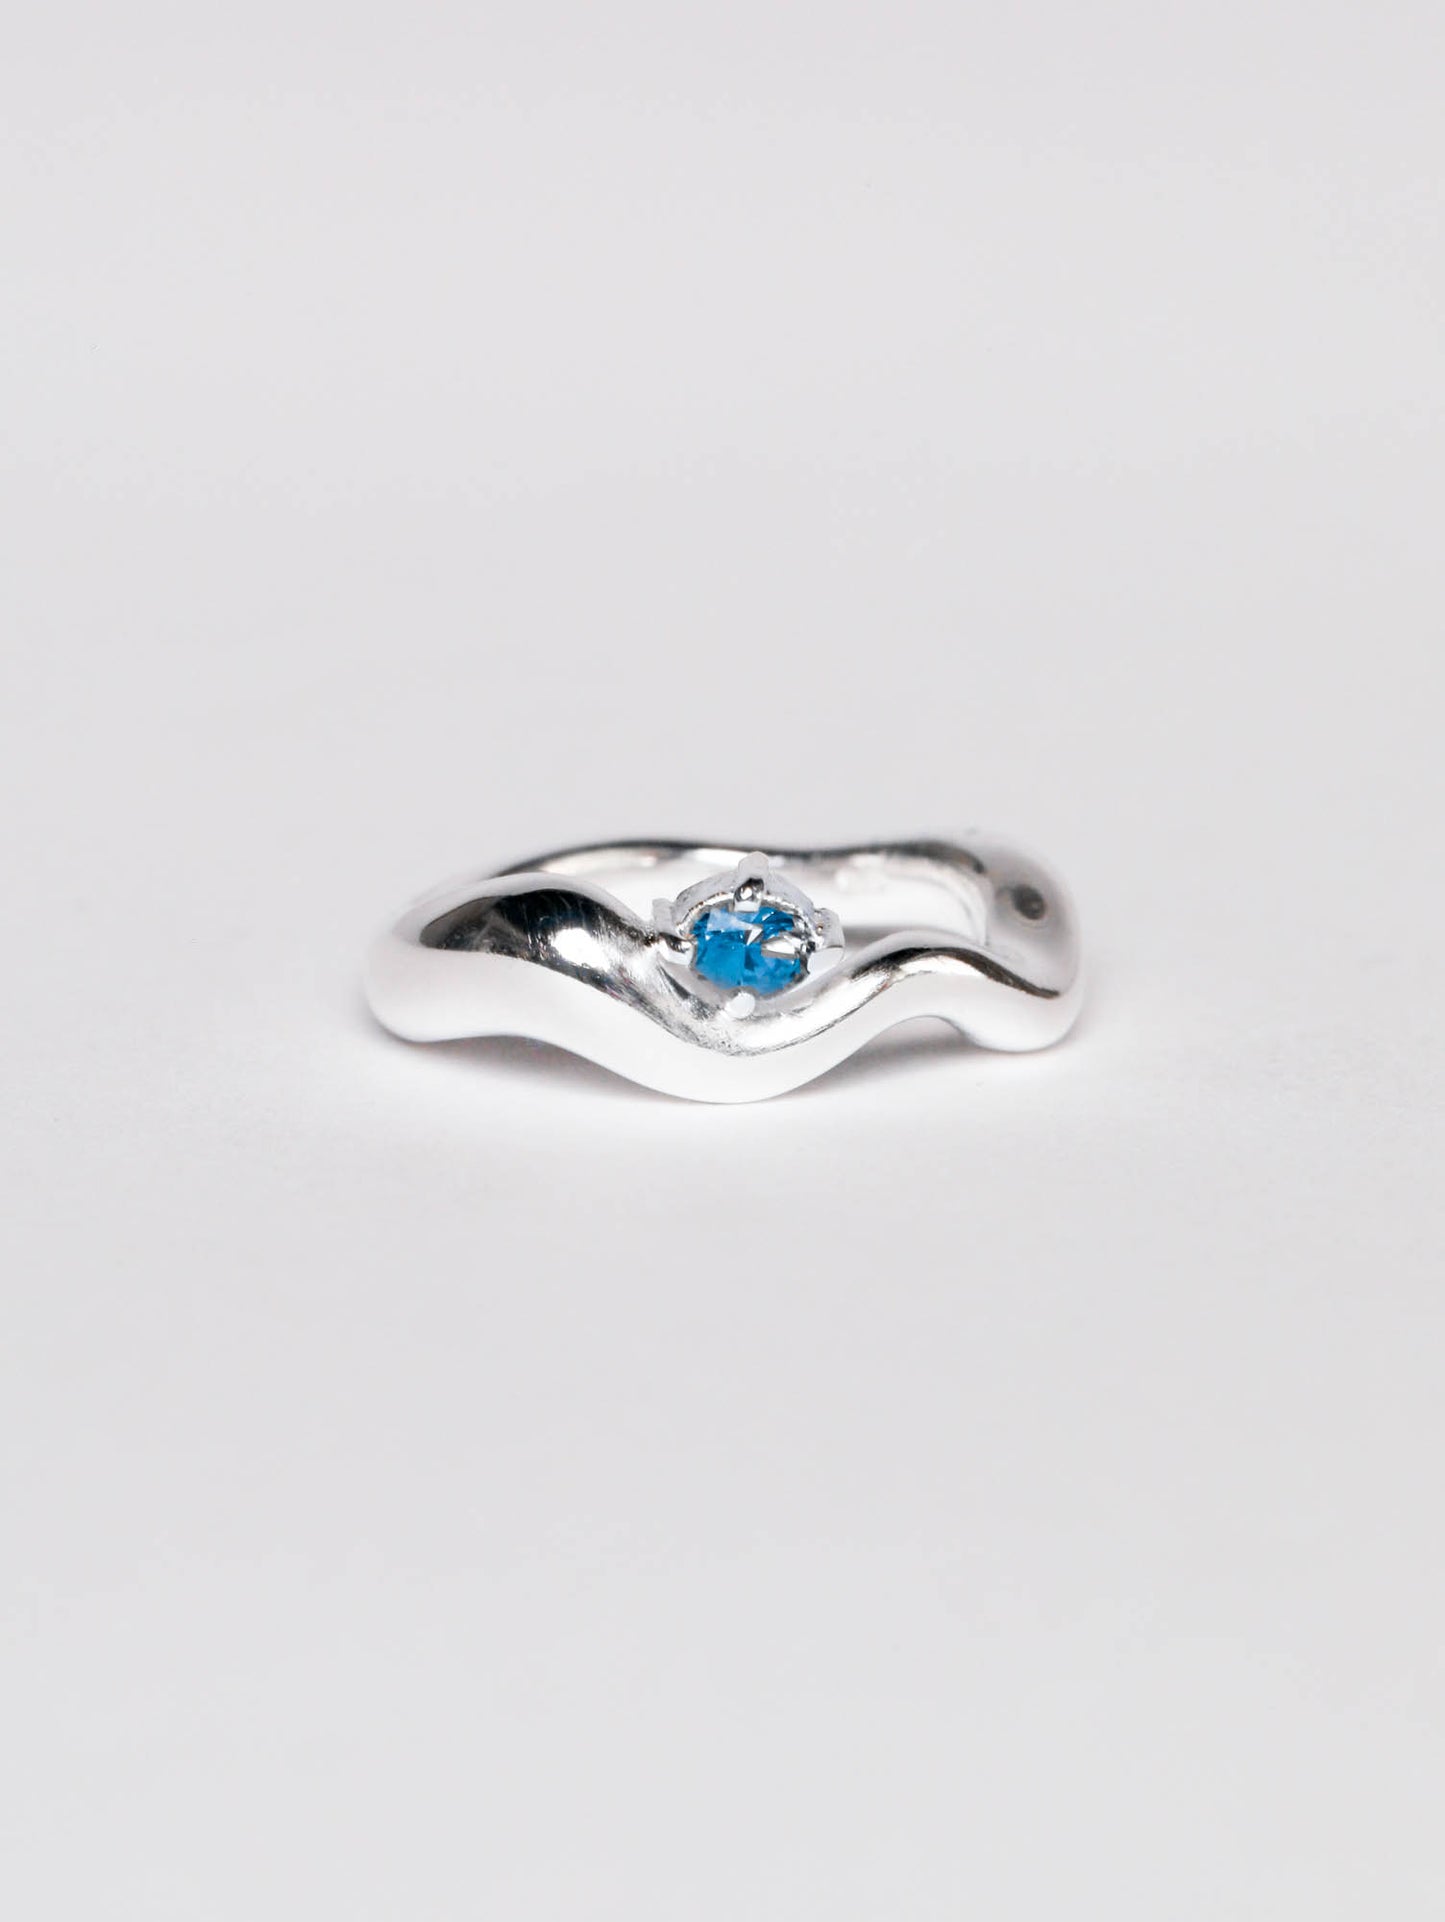 Wave Ring Silver with single Sapphire Stone # 2 | Size 6.5